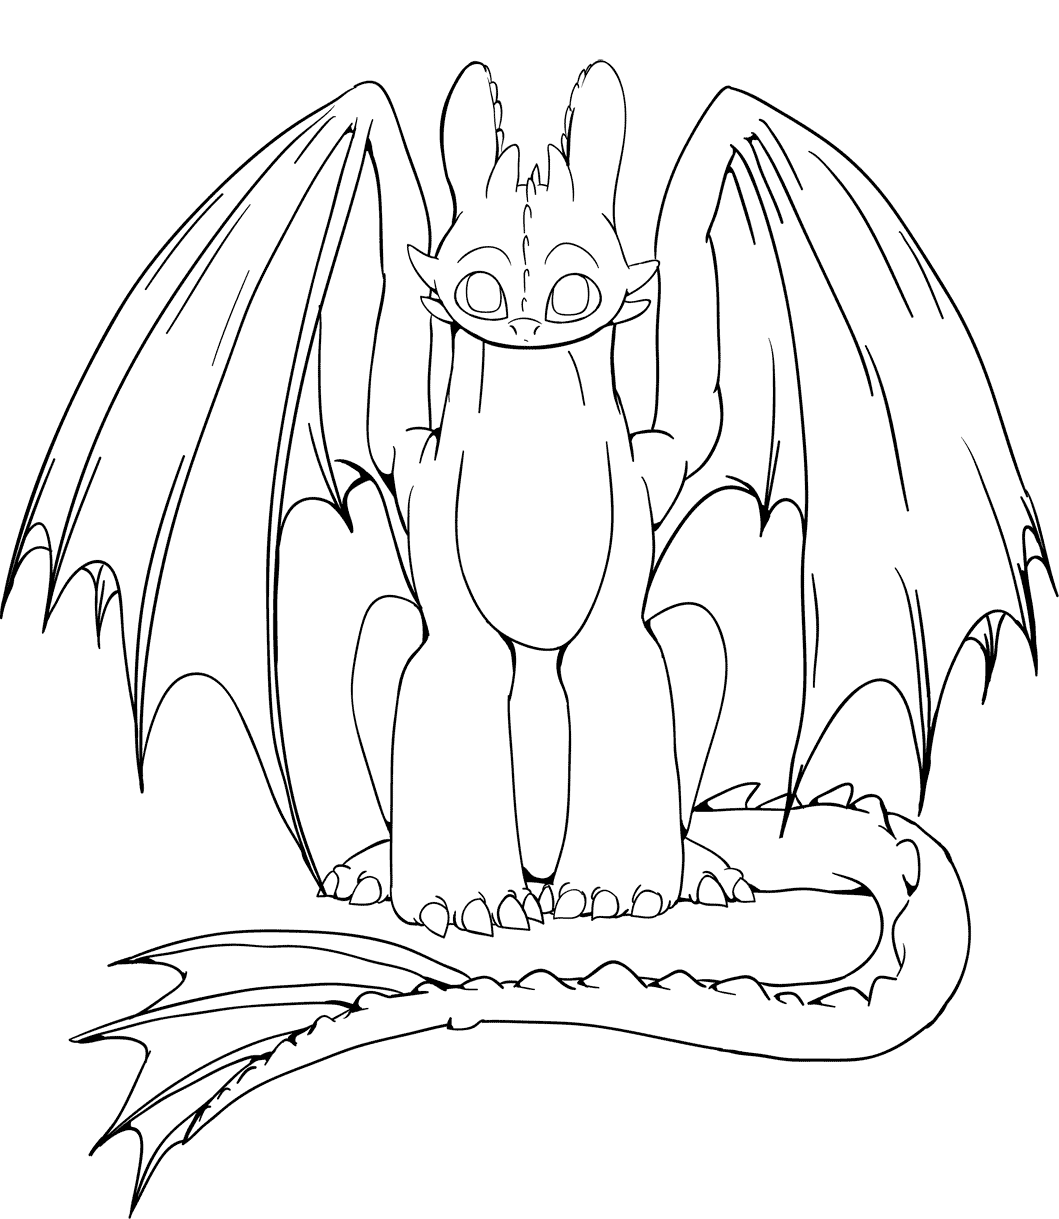 Download How to Train Your Dragon Coloring Pages - Best Coloring ...